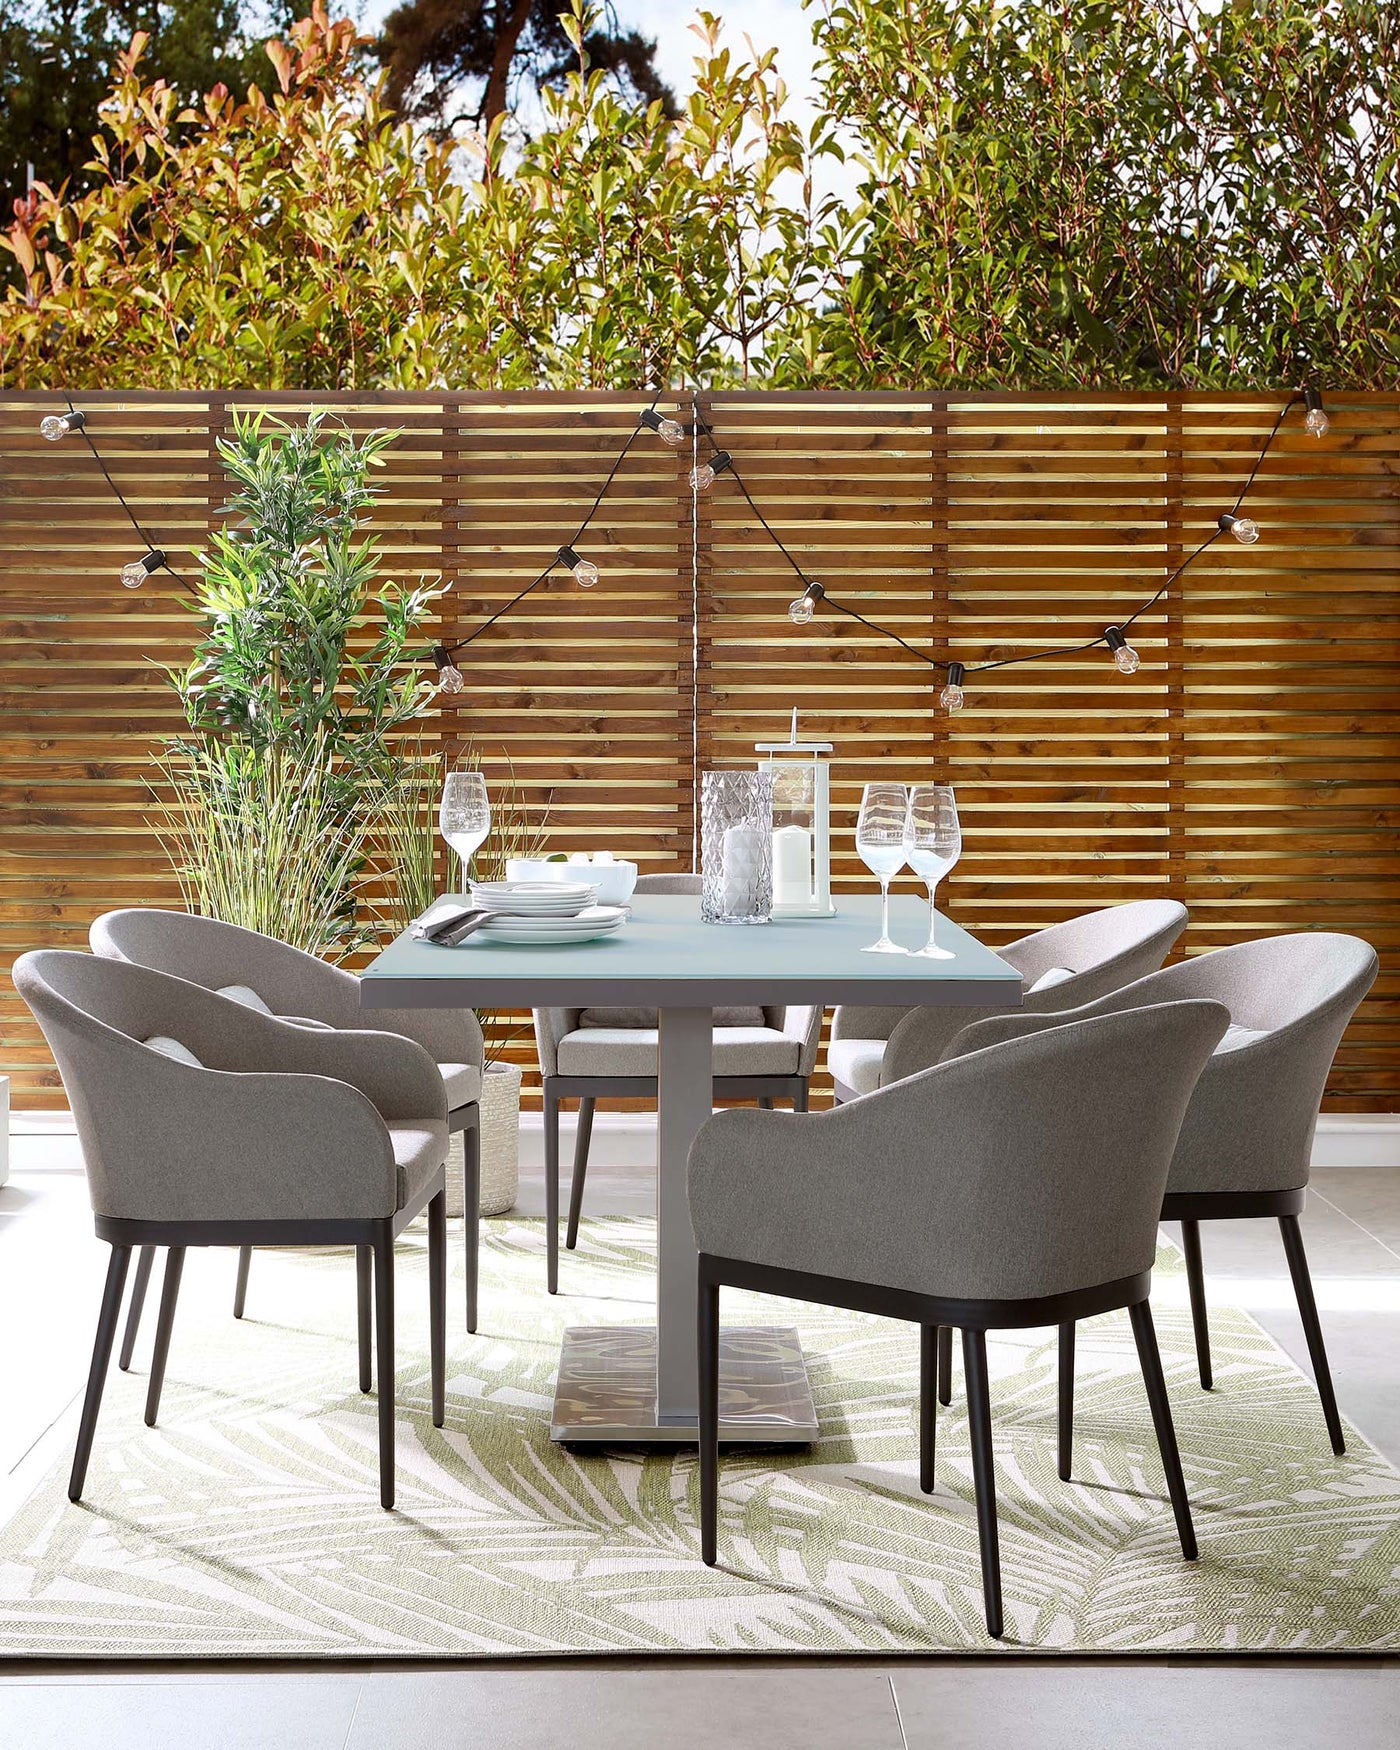 Elegant outdoor dining set featuring a round, light blue table with a sleek, grey central support, surrounded by six grey upholstered armchairs with wooden legs, all positioned on a leaf-patterned area rug.